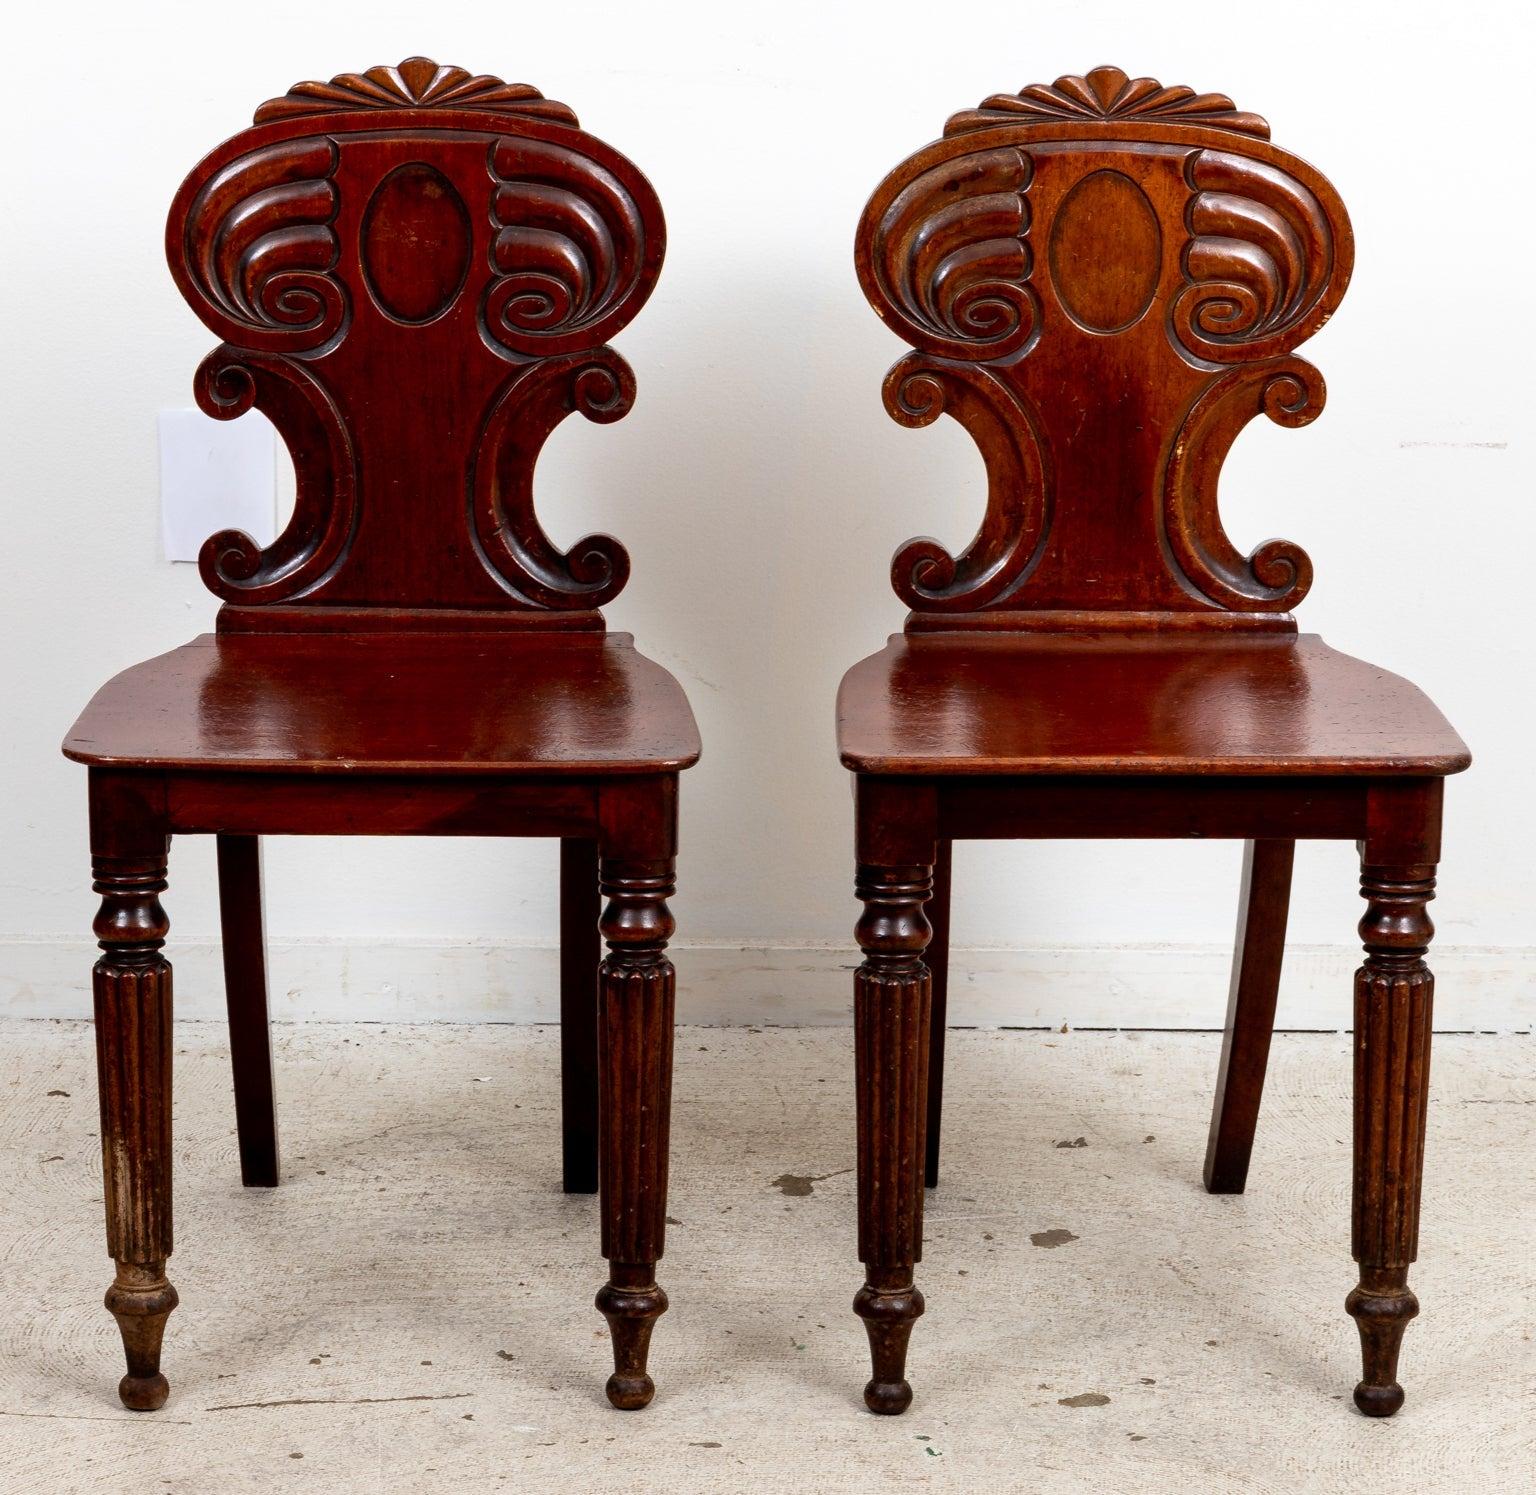 Pair of English William IV style Walnut hall chairs carved with fluted, turned legs and c-scroll motifs on the seat back. The seat back is also decorated with a central oval shaped medallion and a fan design on the top rail. Origin unknown. Please